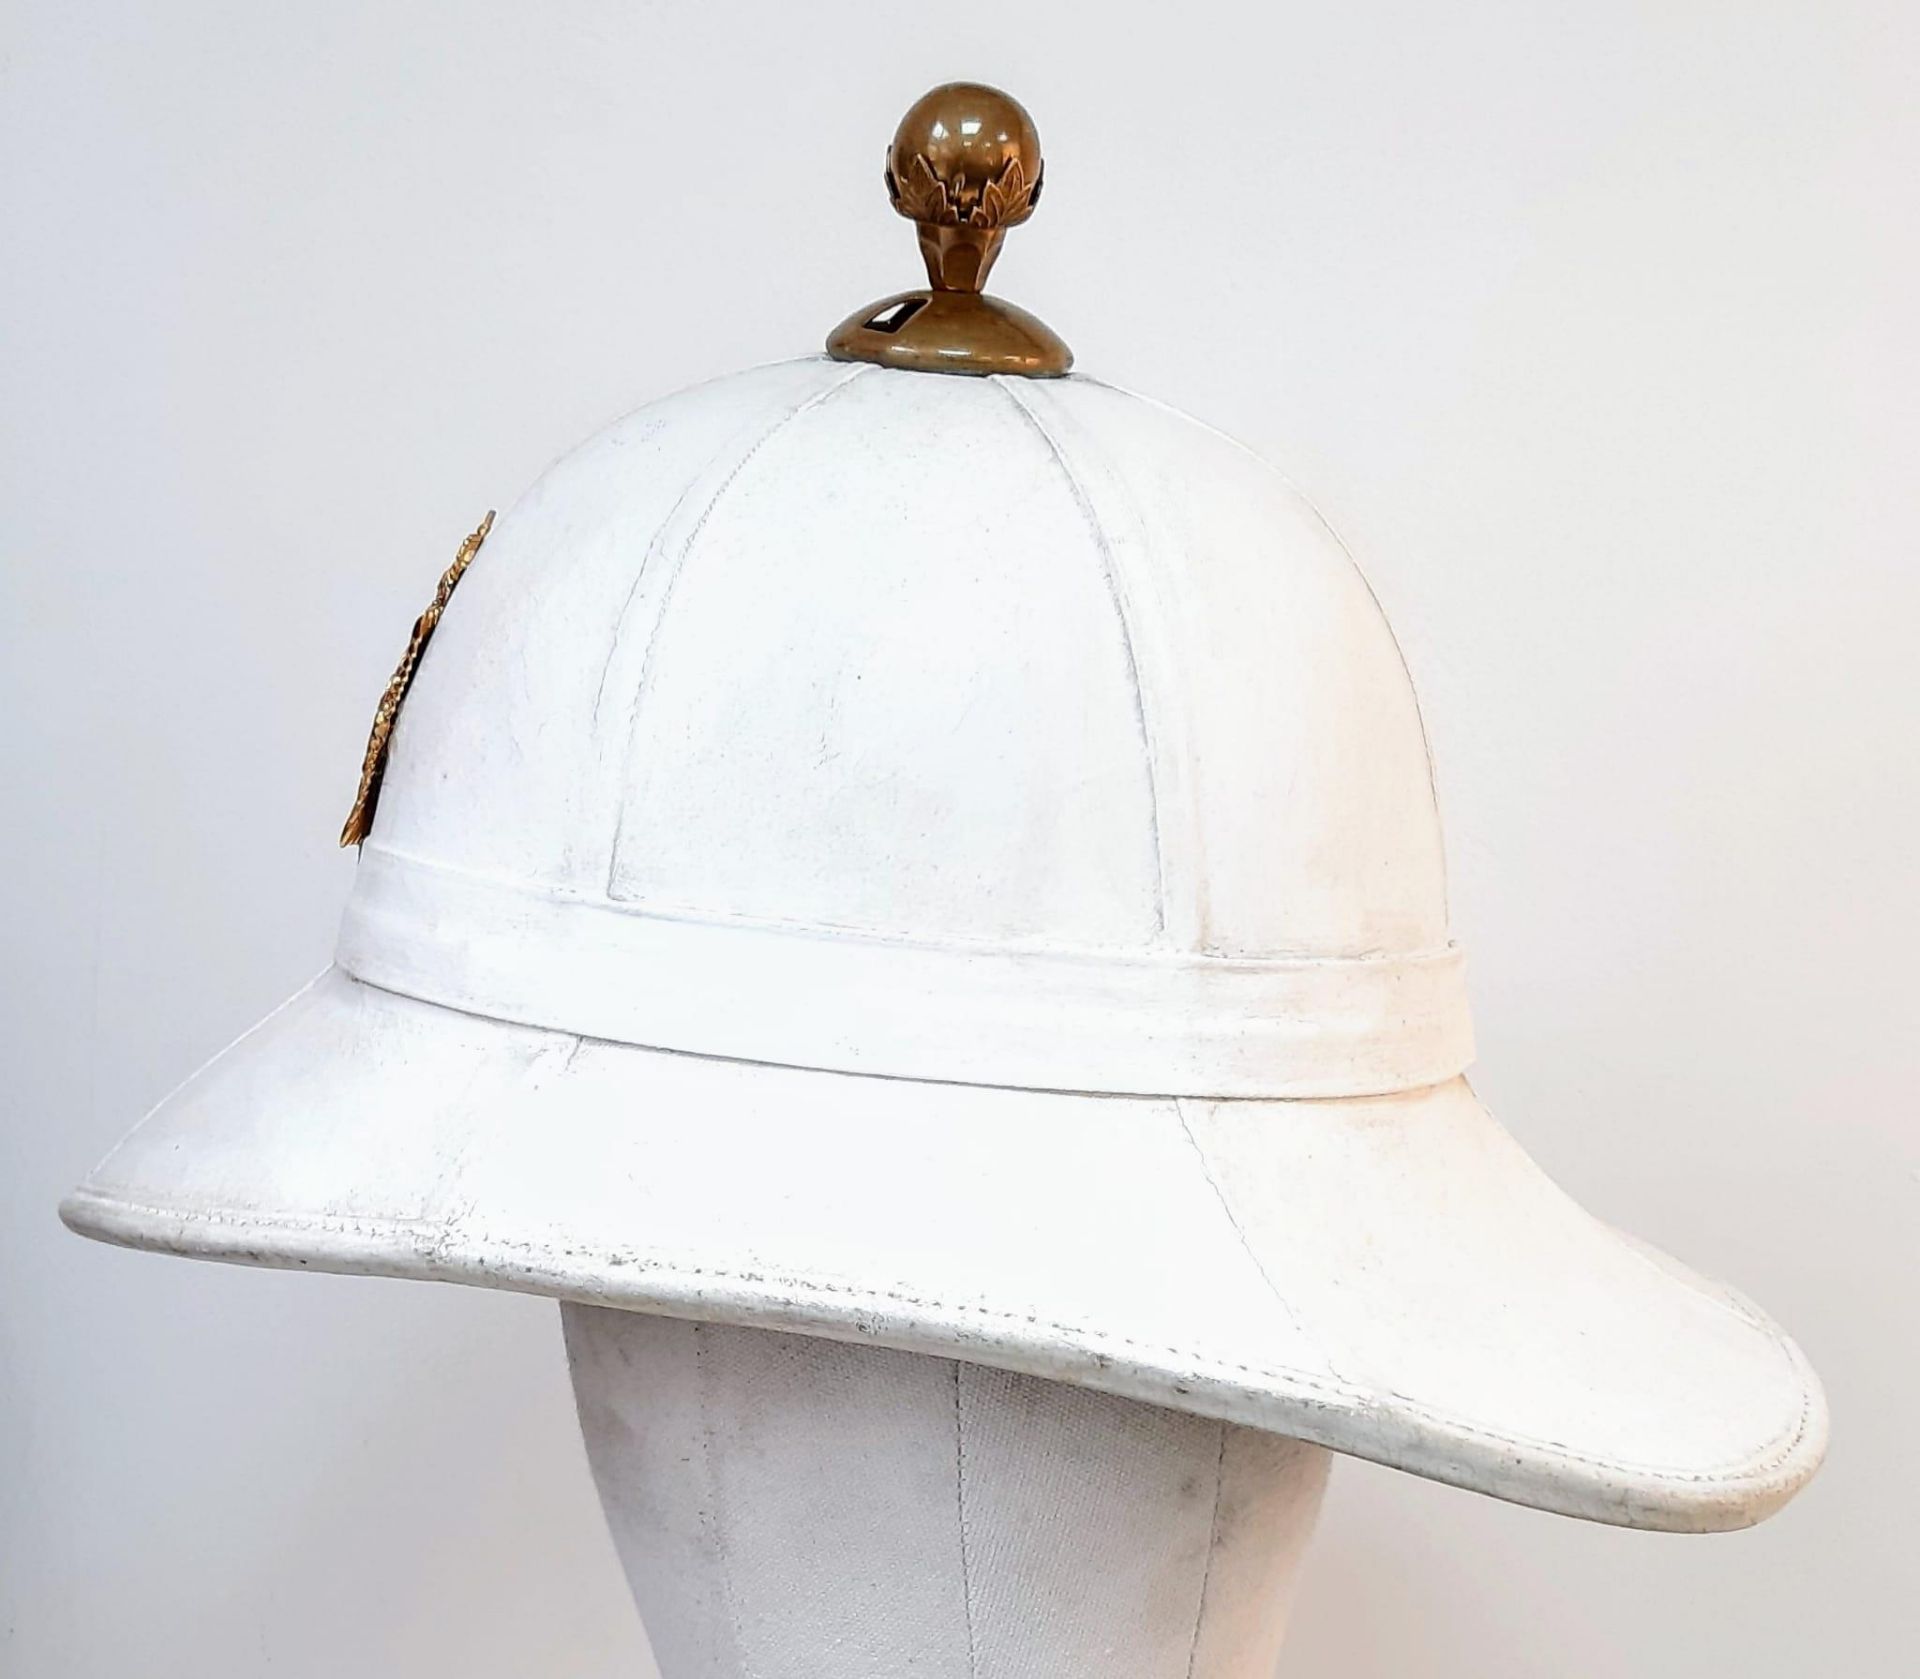 Royal Marines Band Other Ranks Wolseley Pith Helmet with Badge of Queen Elizabeth II (1952-2022). - Image 2 of 5